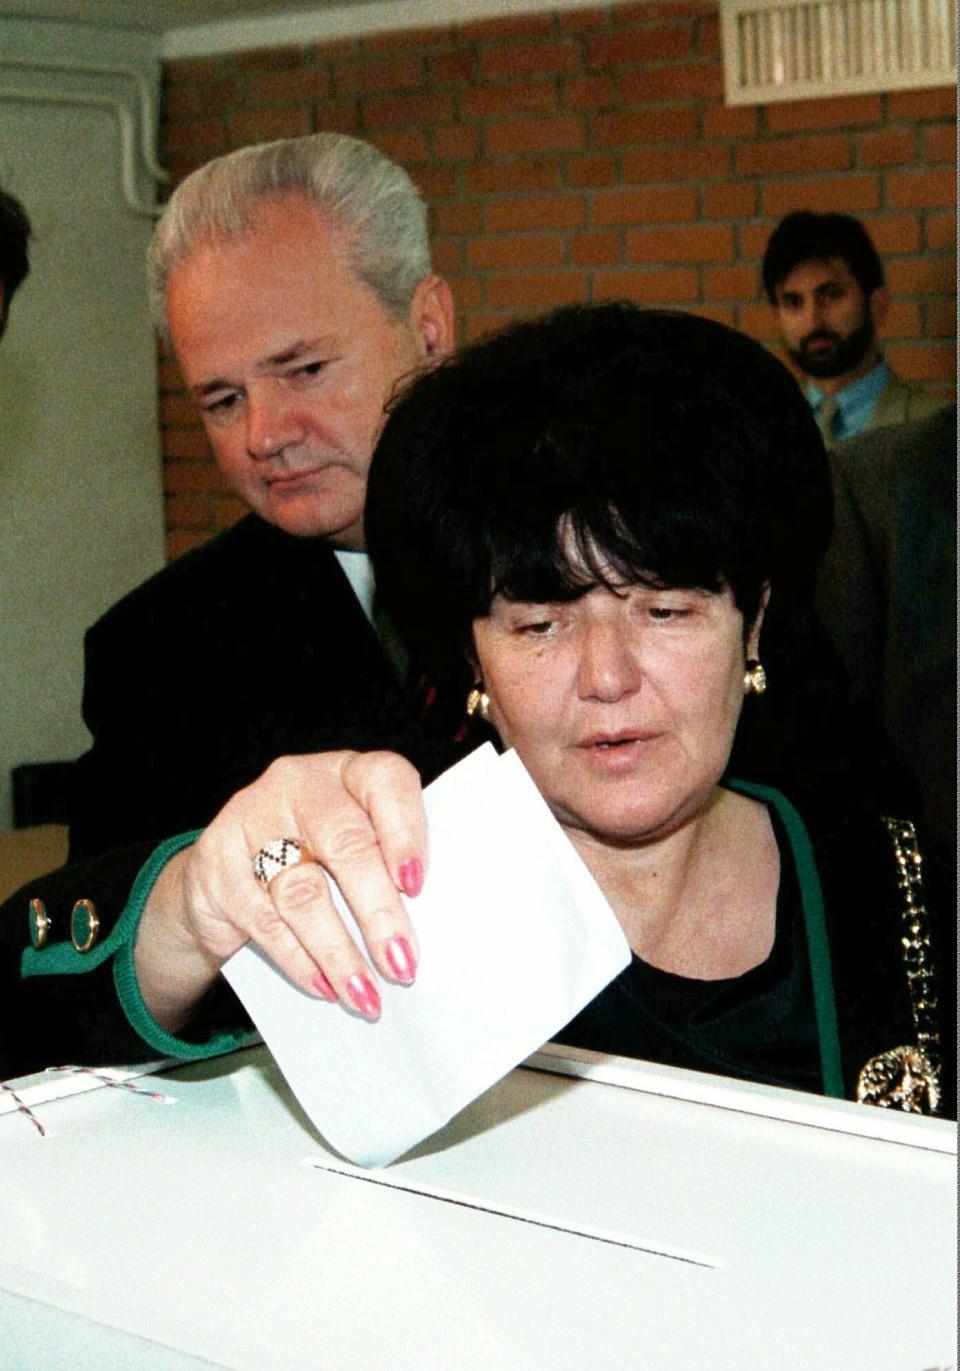 FILE - In this Sunday, Oct. 5, 1997 file photo, Mirjana Markovic, right, the wife of Yugoslav president Slobodan Milosevic, votes, left, in Sunday's presidental Serbian elections, in Belgrade. Serbia’s state television said that Mirjana Markovic, the widow of former strongman Slobodan Milosevic who was considered a power behind the scene behind his autocratic rule, has died in Russia on Saturday. She was 76, it was reported on Sunday, April 14, 2019. (AP Photo /Darko Vojinovic, File)